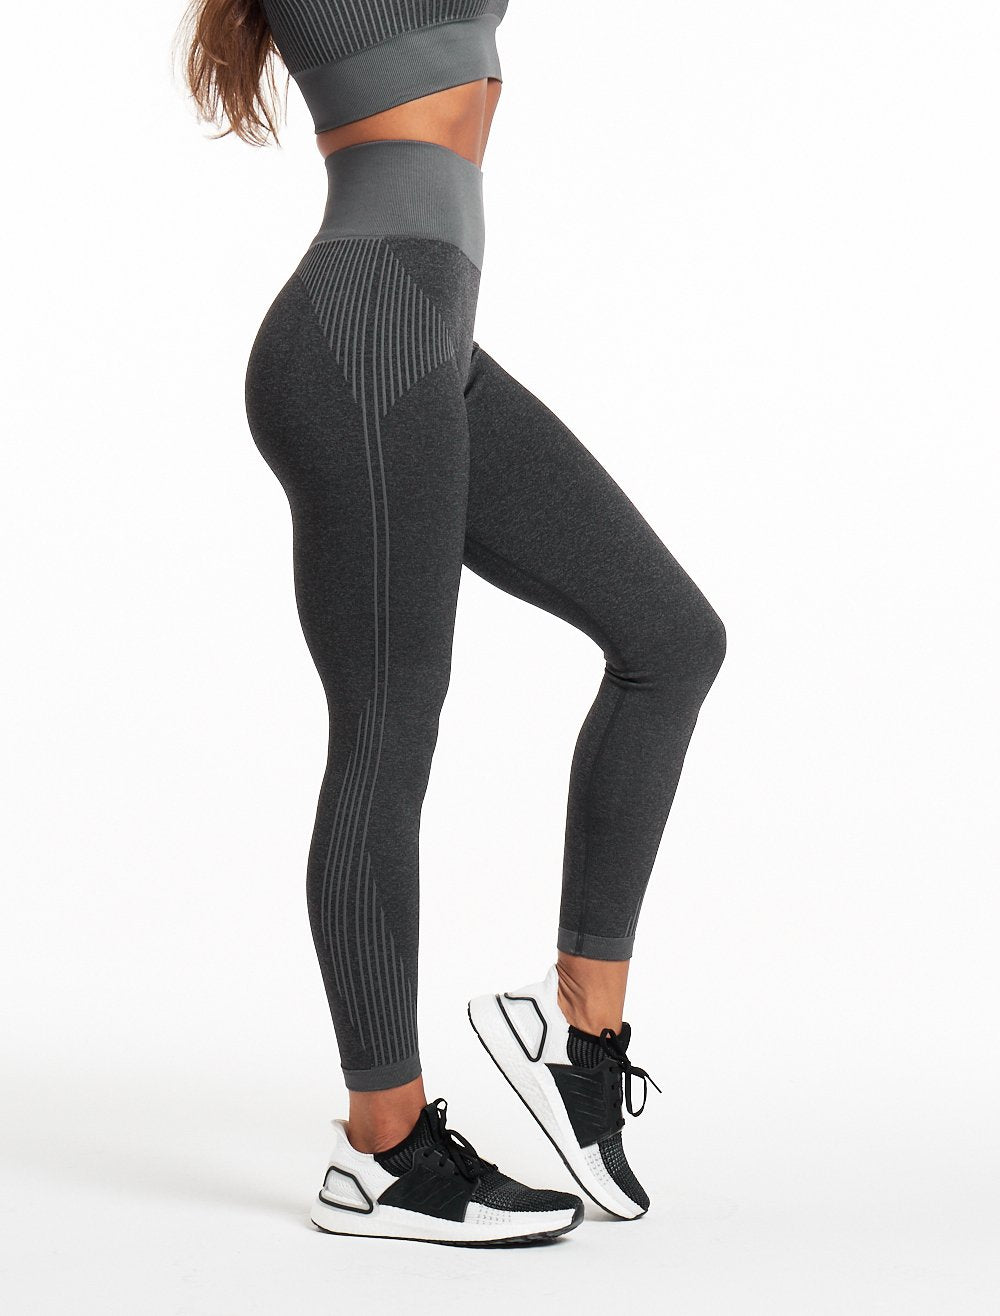 Black Charcoal ADAPT Seamless High Waisted Leggings | Pursue Fitness